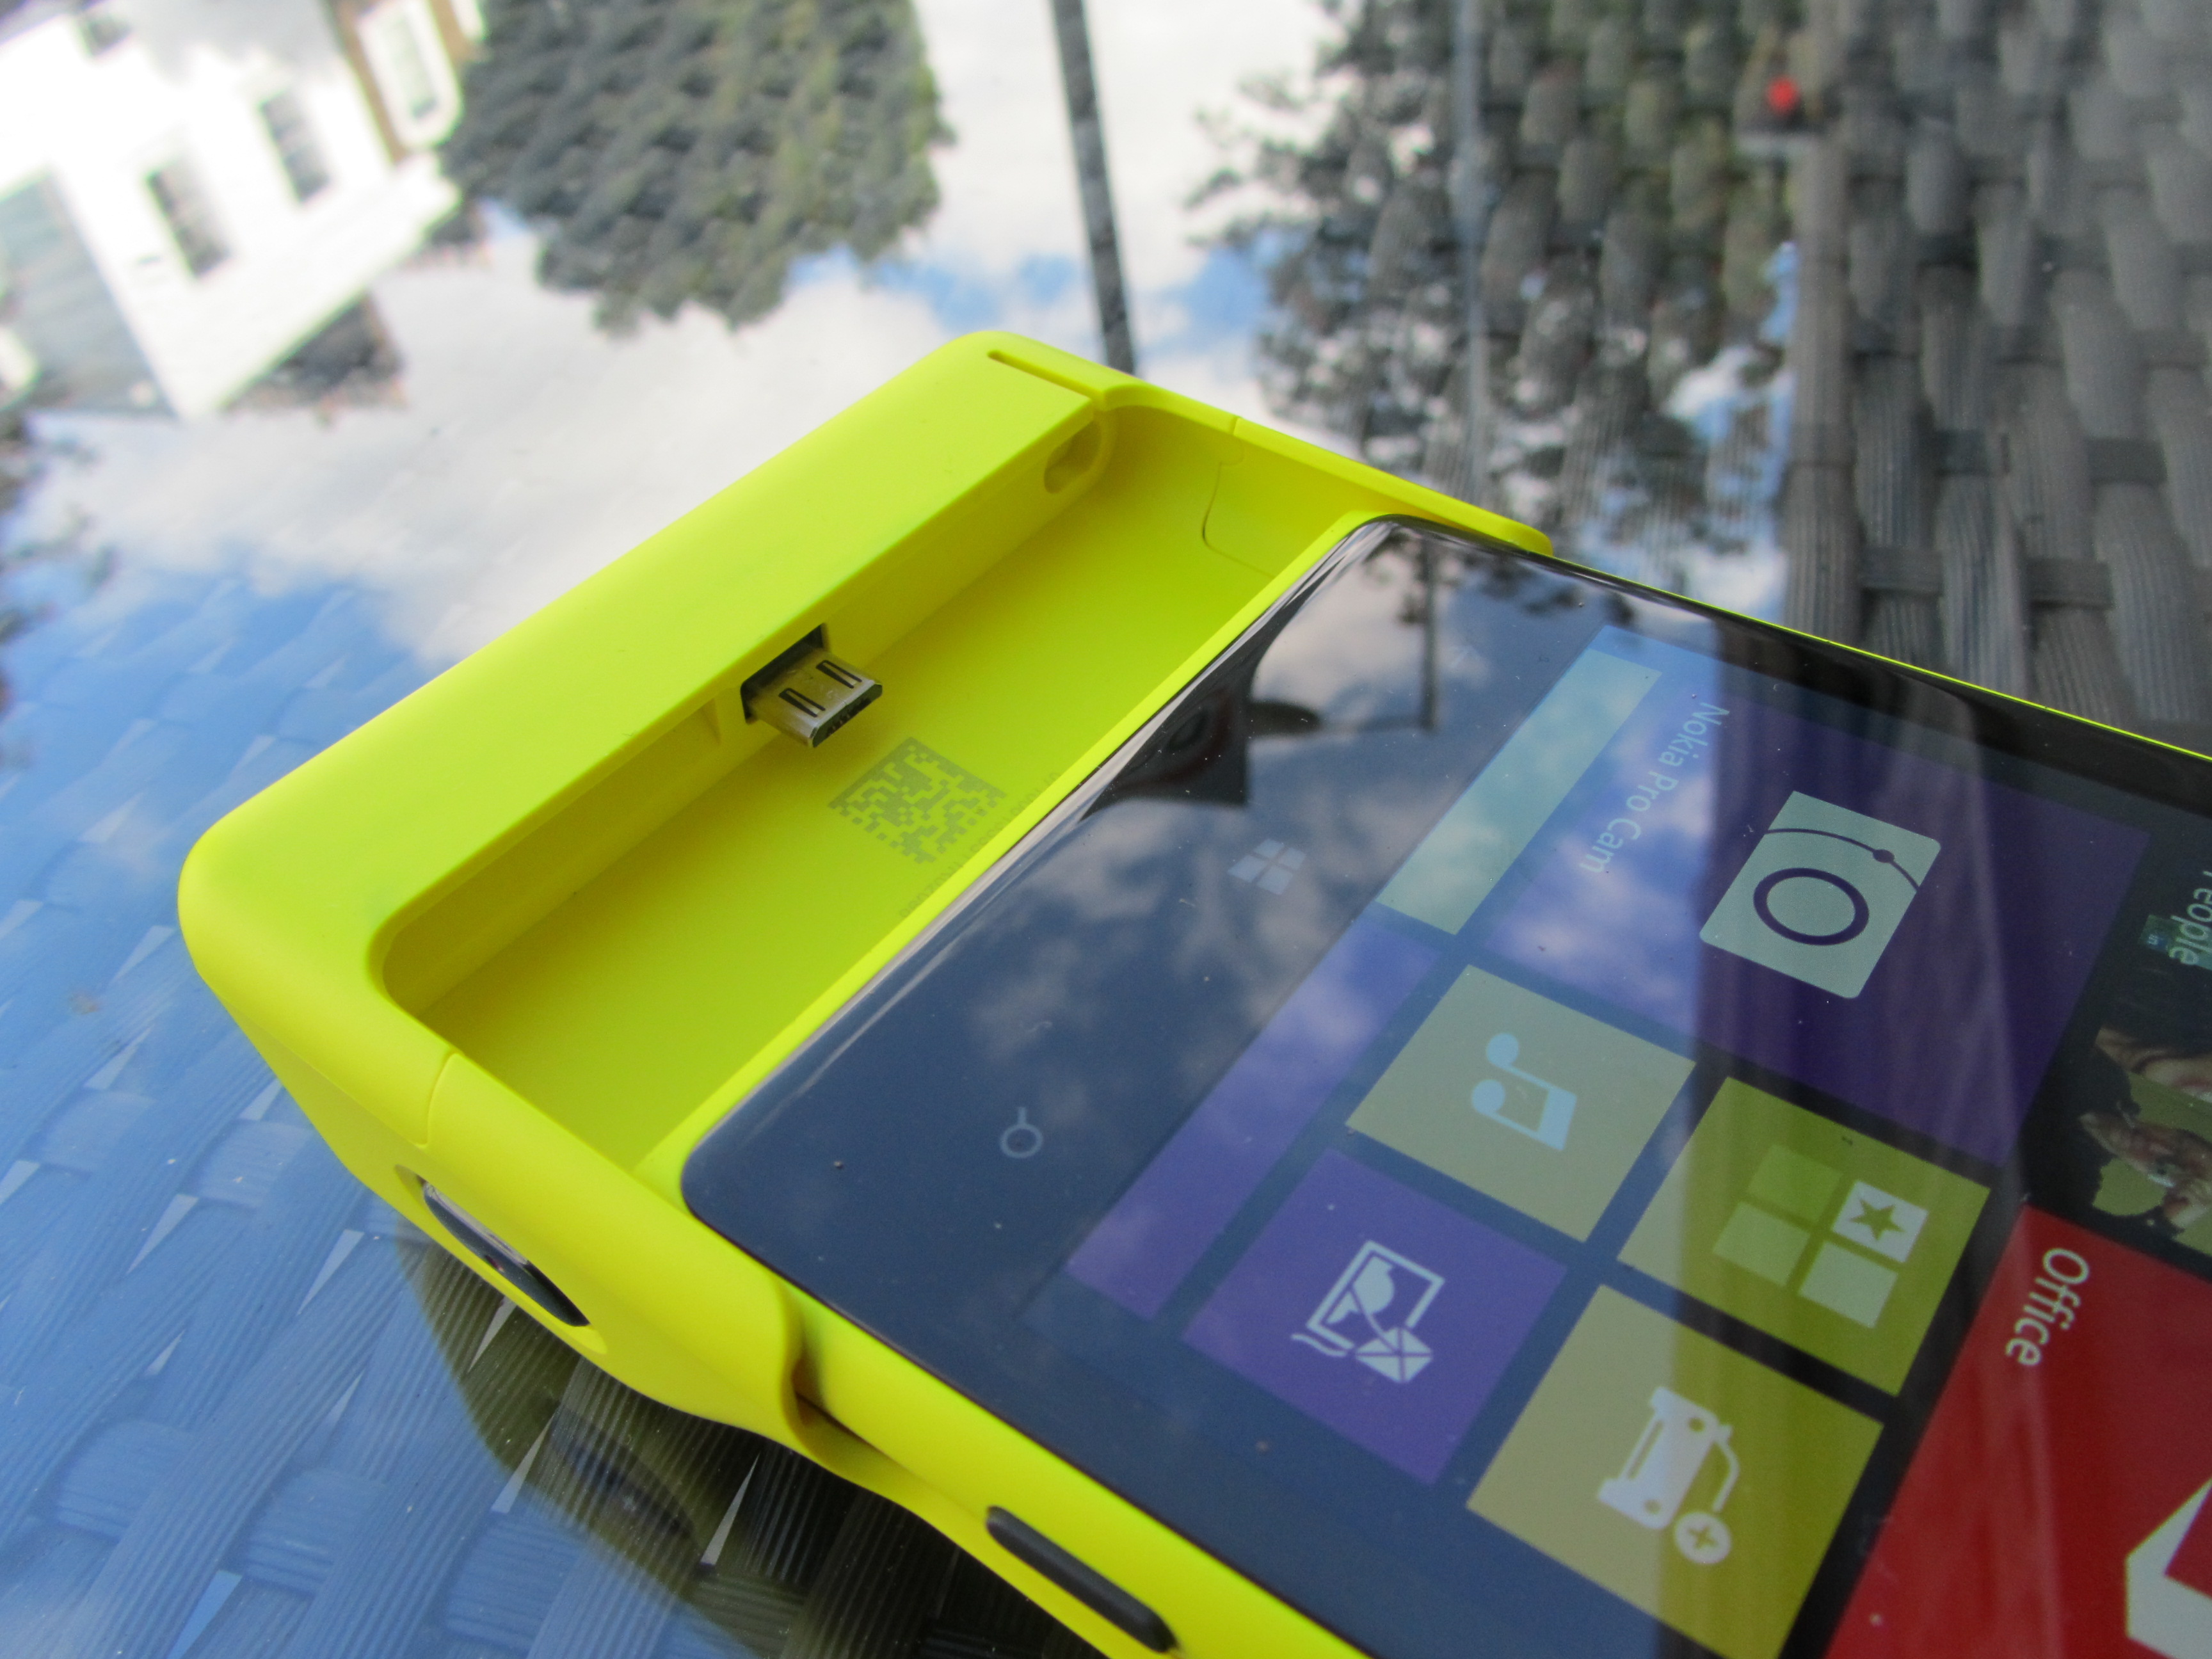 IMG 2021 Nokia Lumia 1020 review: The best camera phone, but not the best smartphone